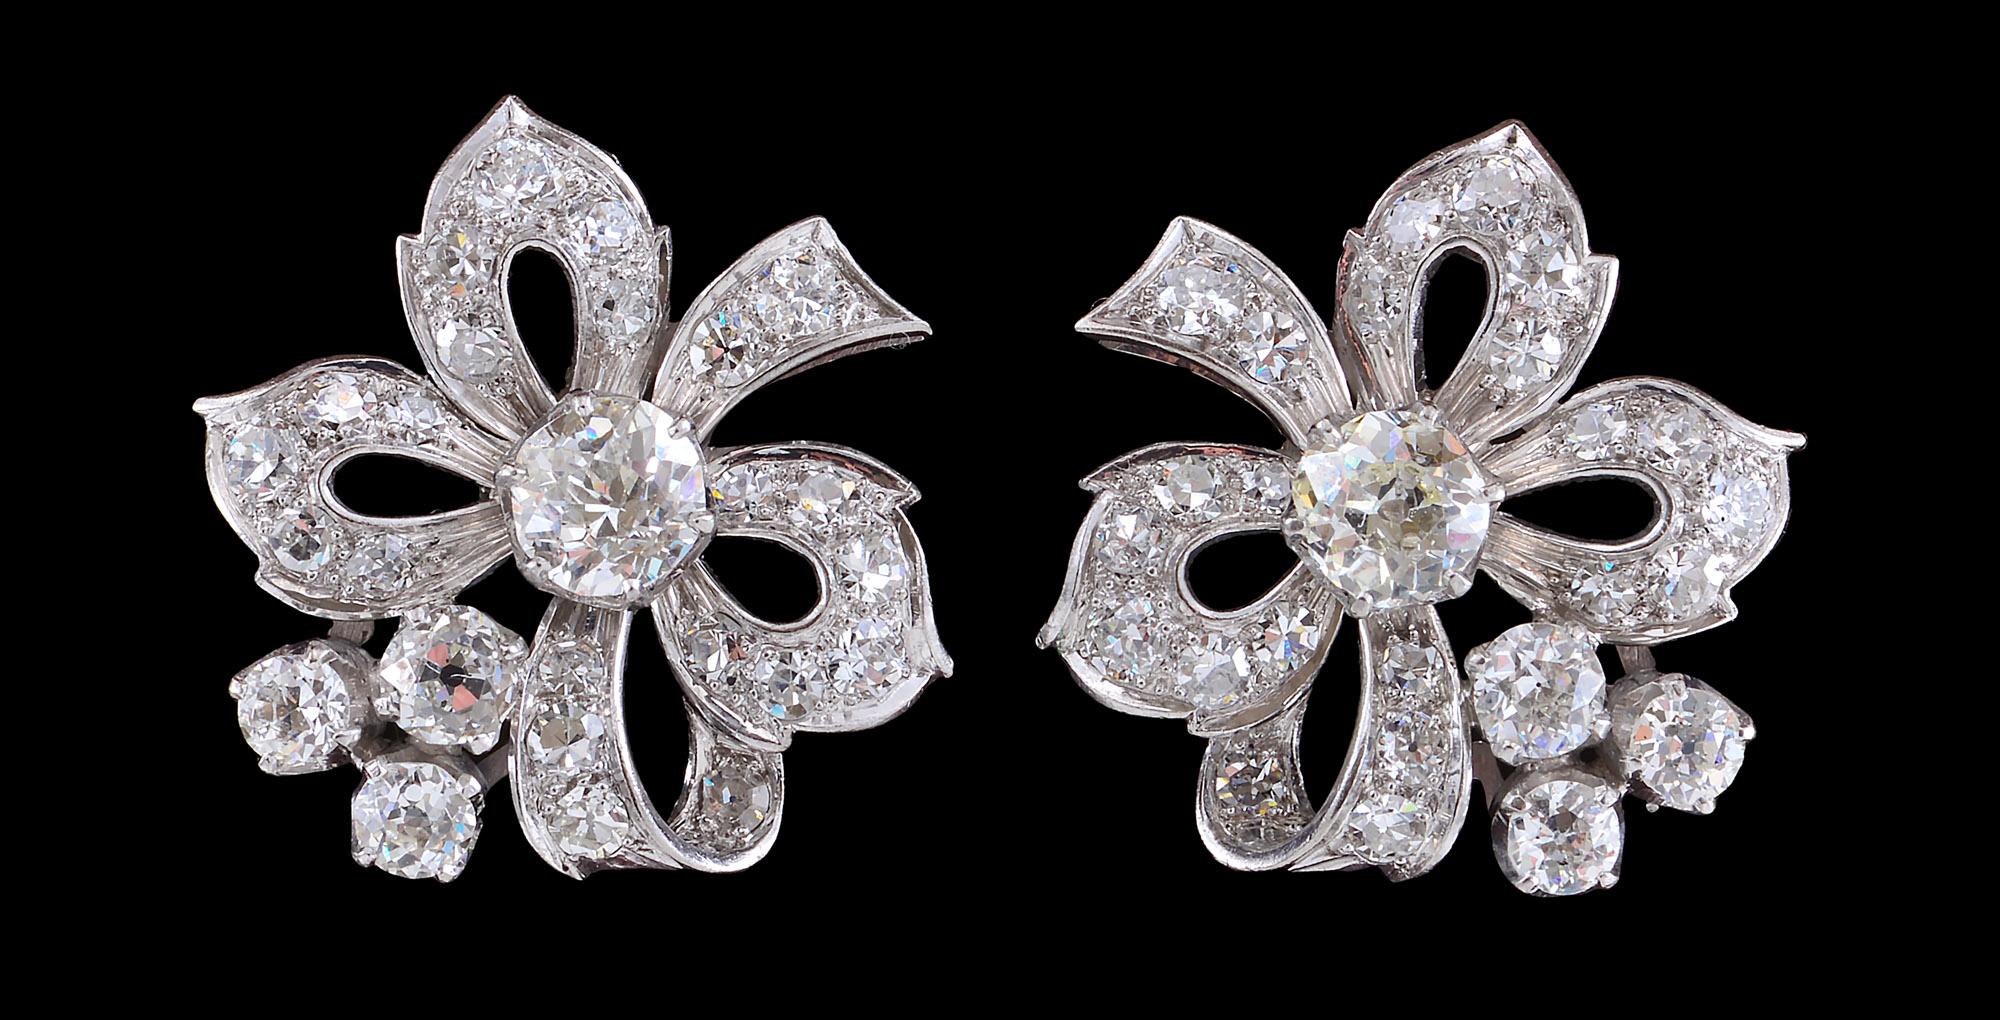 These exuberant and fun Diamond earrings of the 1950s stylised as bows  are each is set with a central diamond of an estimated weight of 0.66 cts surrounded with a mixture of the old and single stone diamonds. The stones are set in both claw and